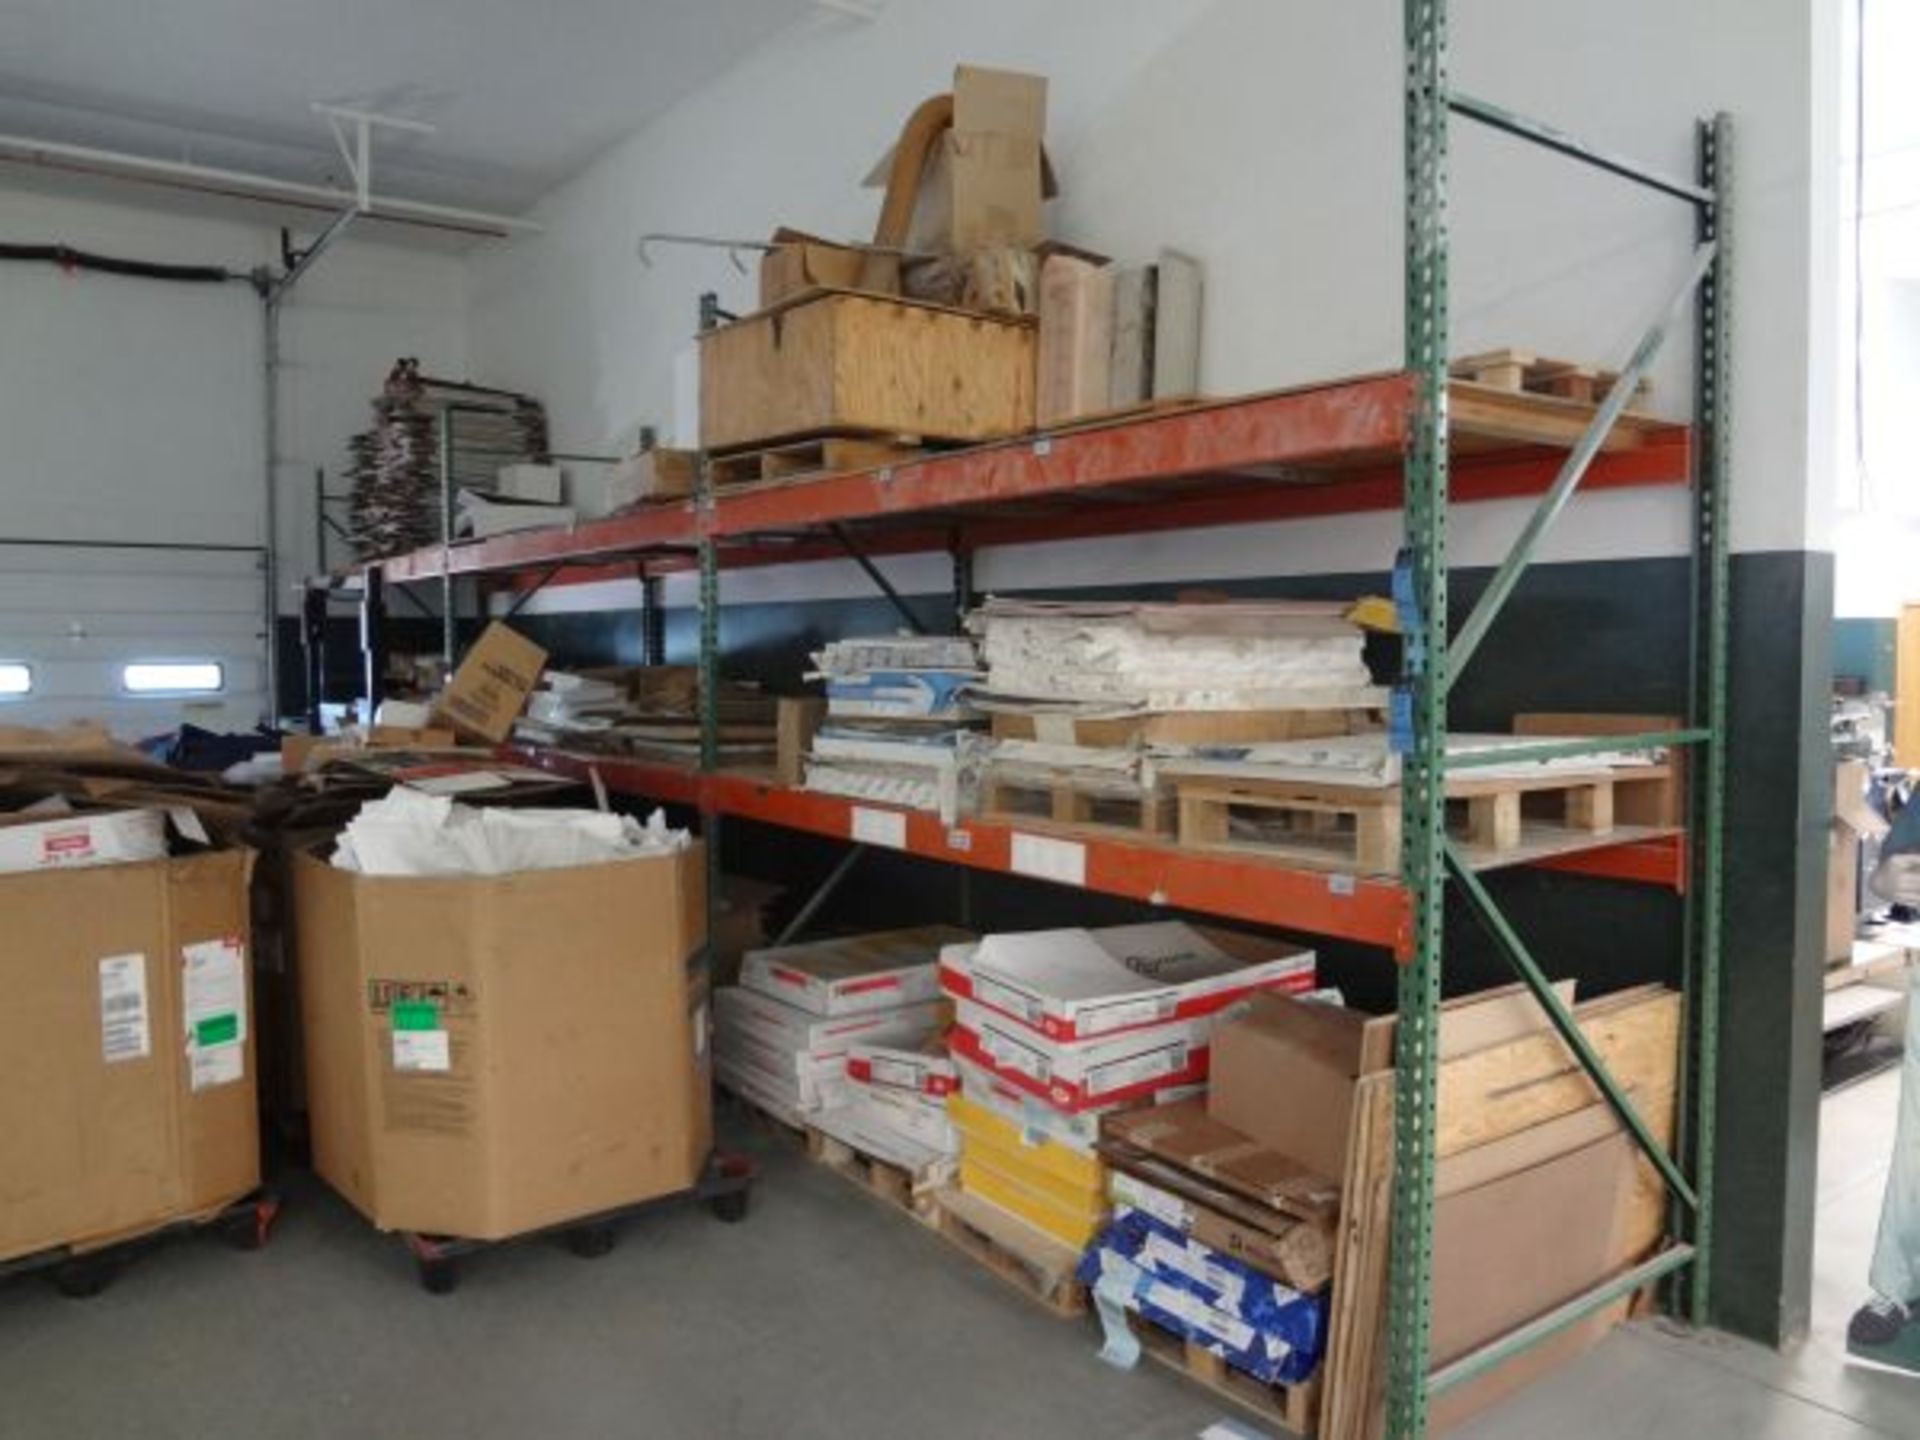 SECTIONS 48" WIDE X 120" LONG X 120" HIGH ADJUSTABLE BEAM PALLET RACKS